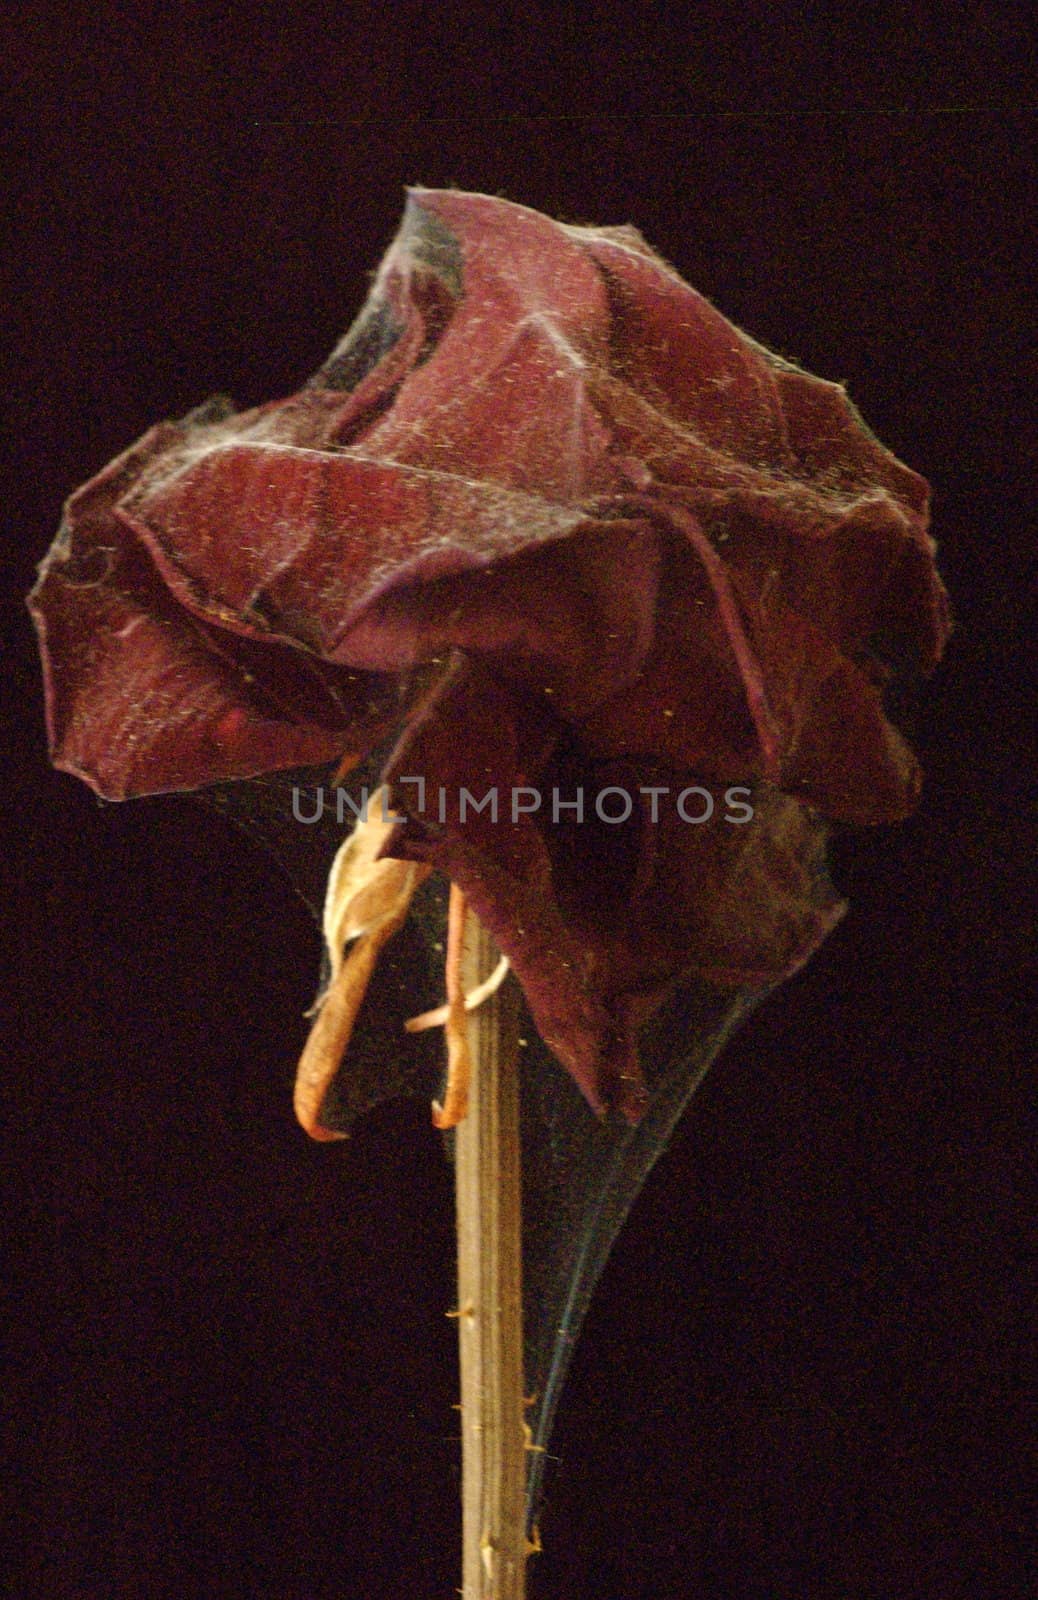 Profile shot of a dead, cobweb covered red rose against a black background